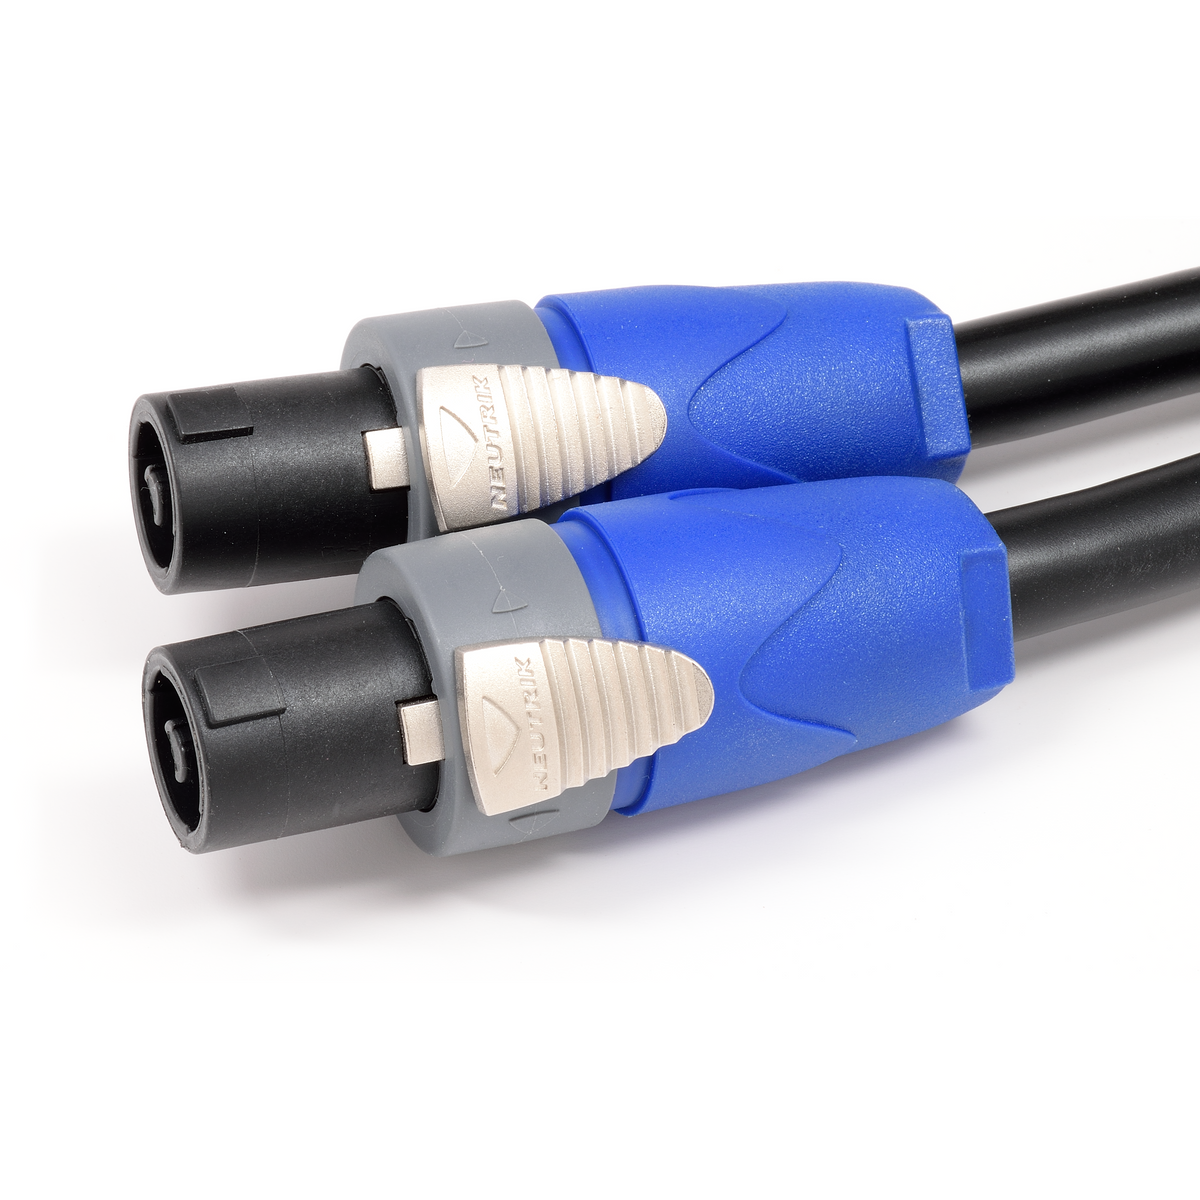 Benchmark NL2 to NL2 Speaker Cable